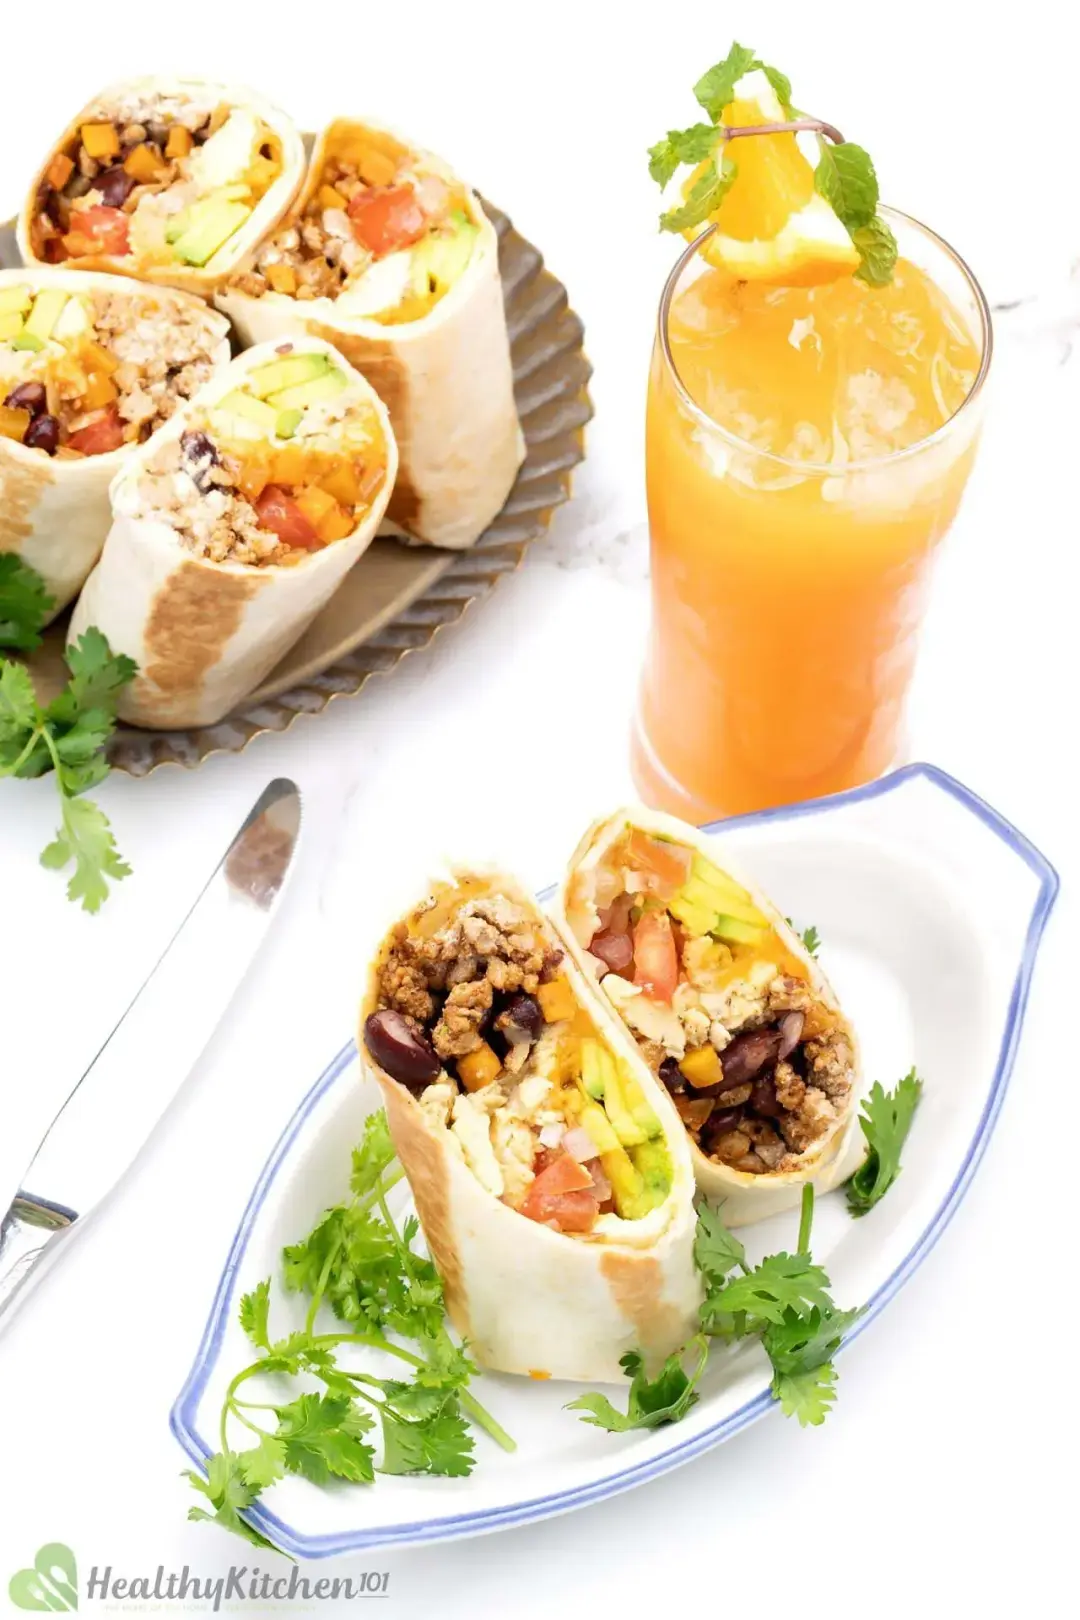 Two plates of burrito rolls cut into segments, showing off colorful fillings, garnished with cilantros and next to a glass of orange juice